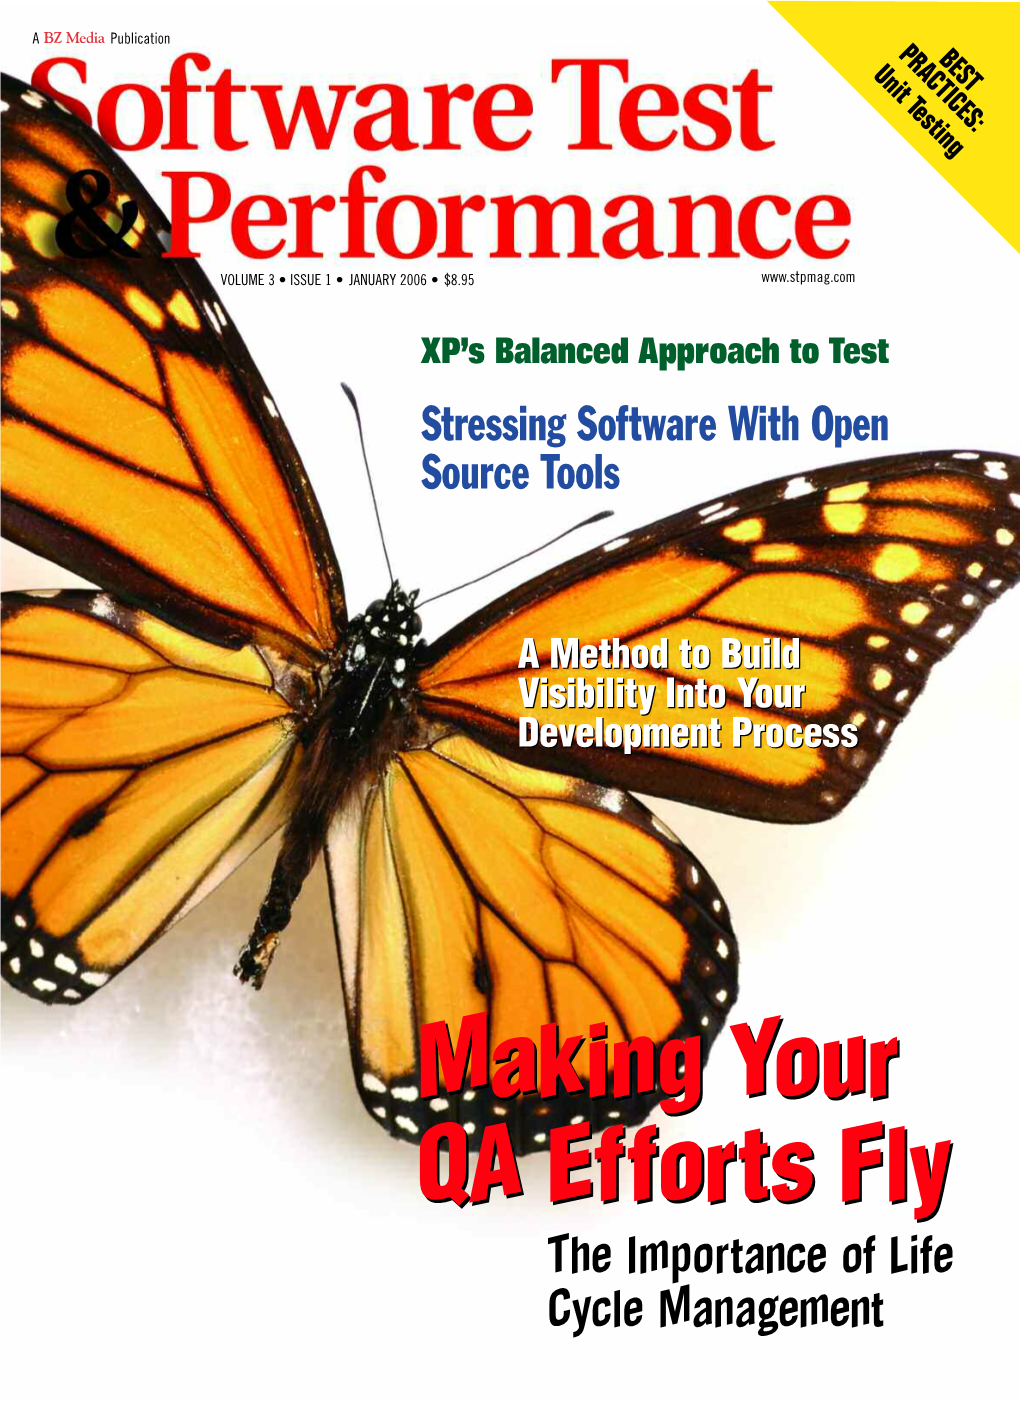 Software Test and Performance, January 2006, Page 26